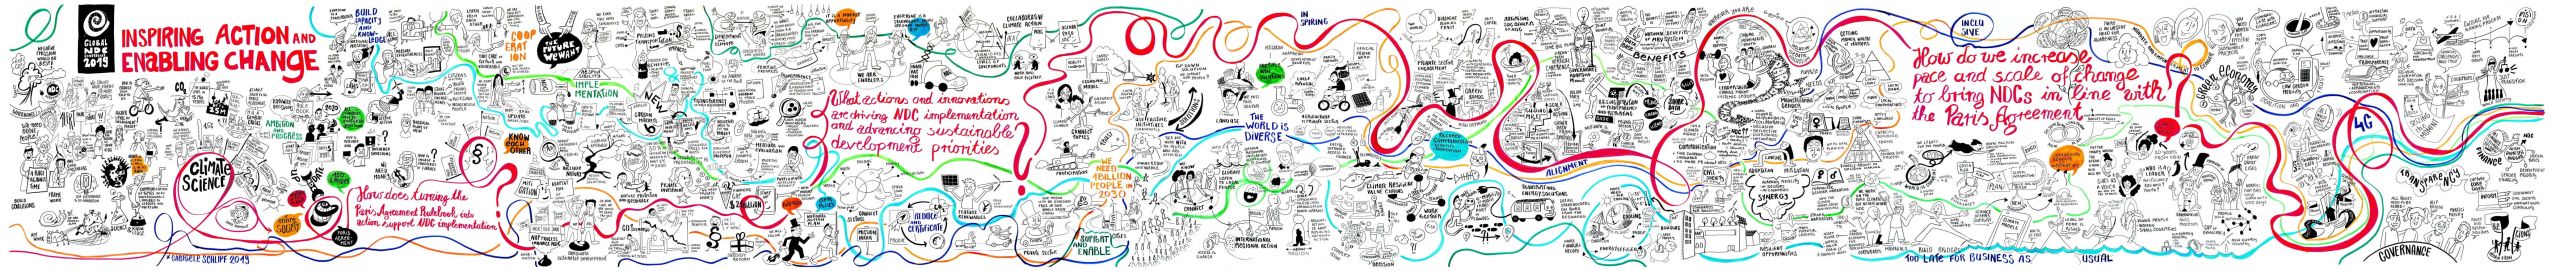 Long picture with colorful graphic recording: looks a bit like grafiti